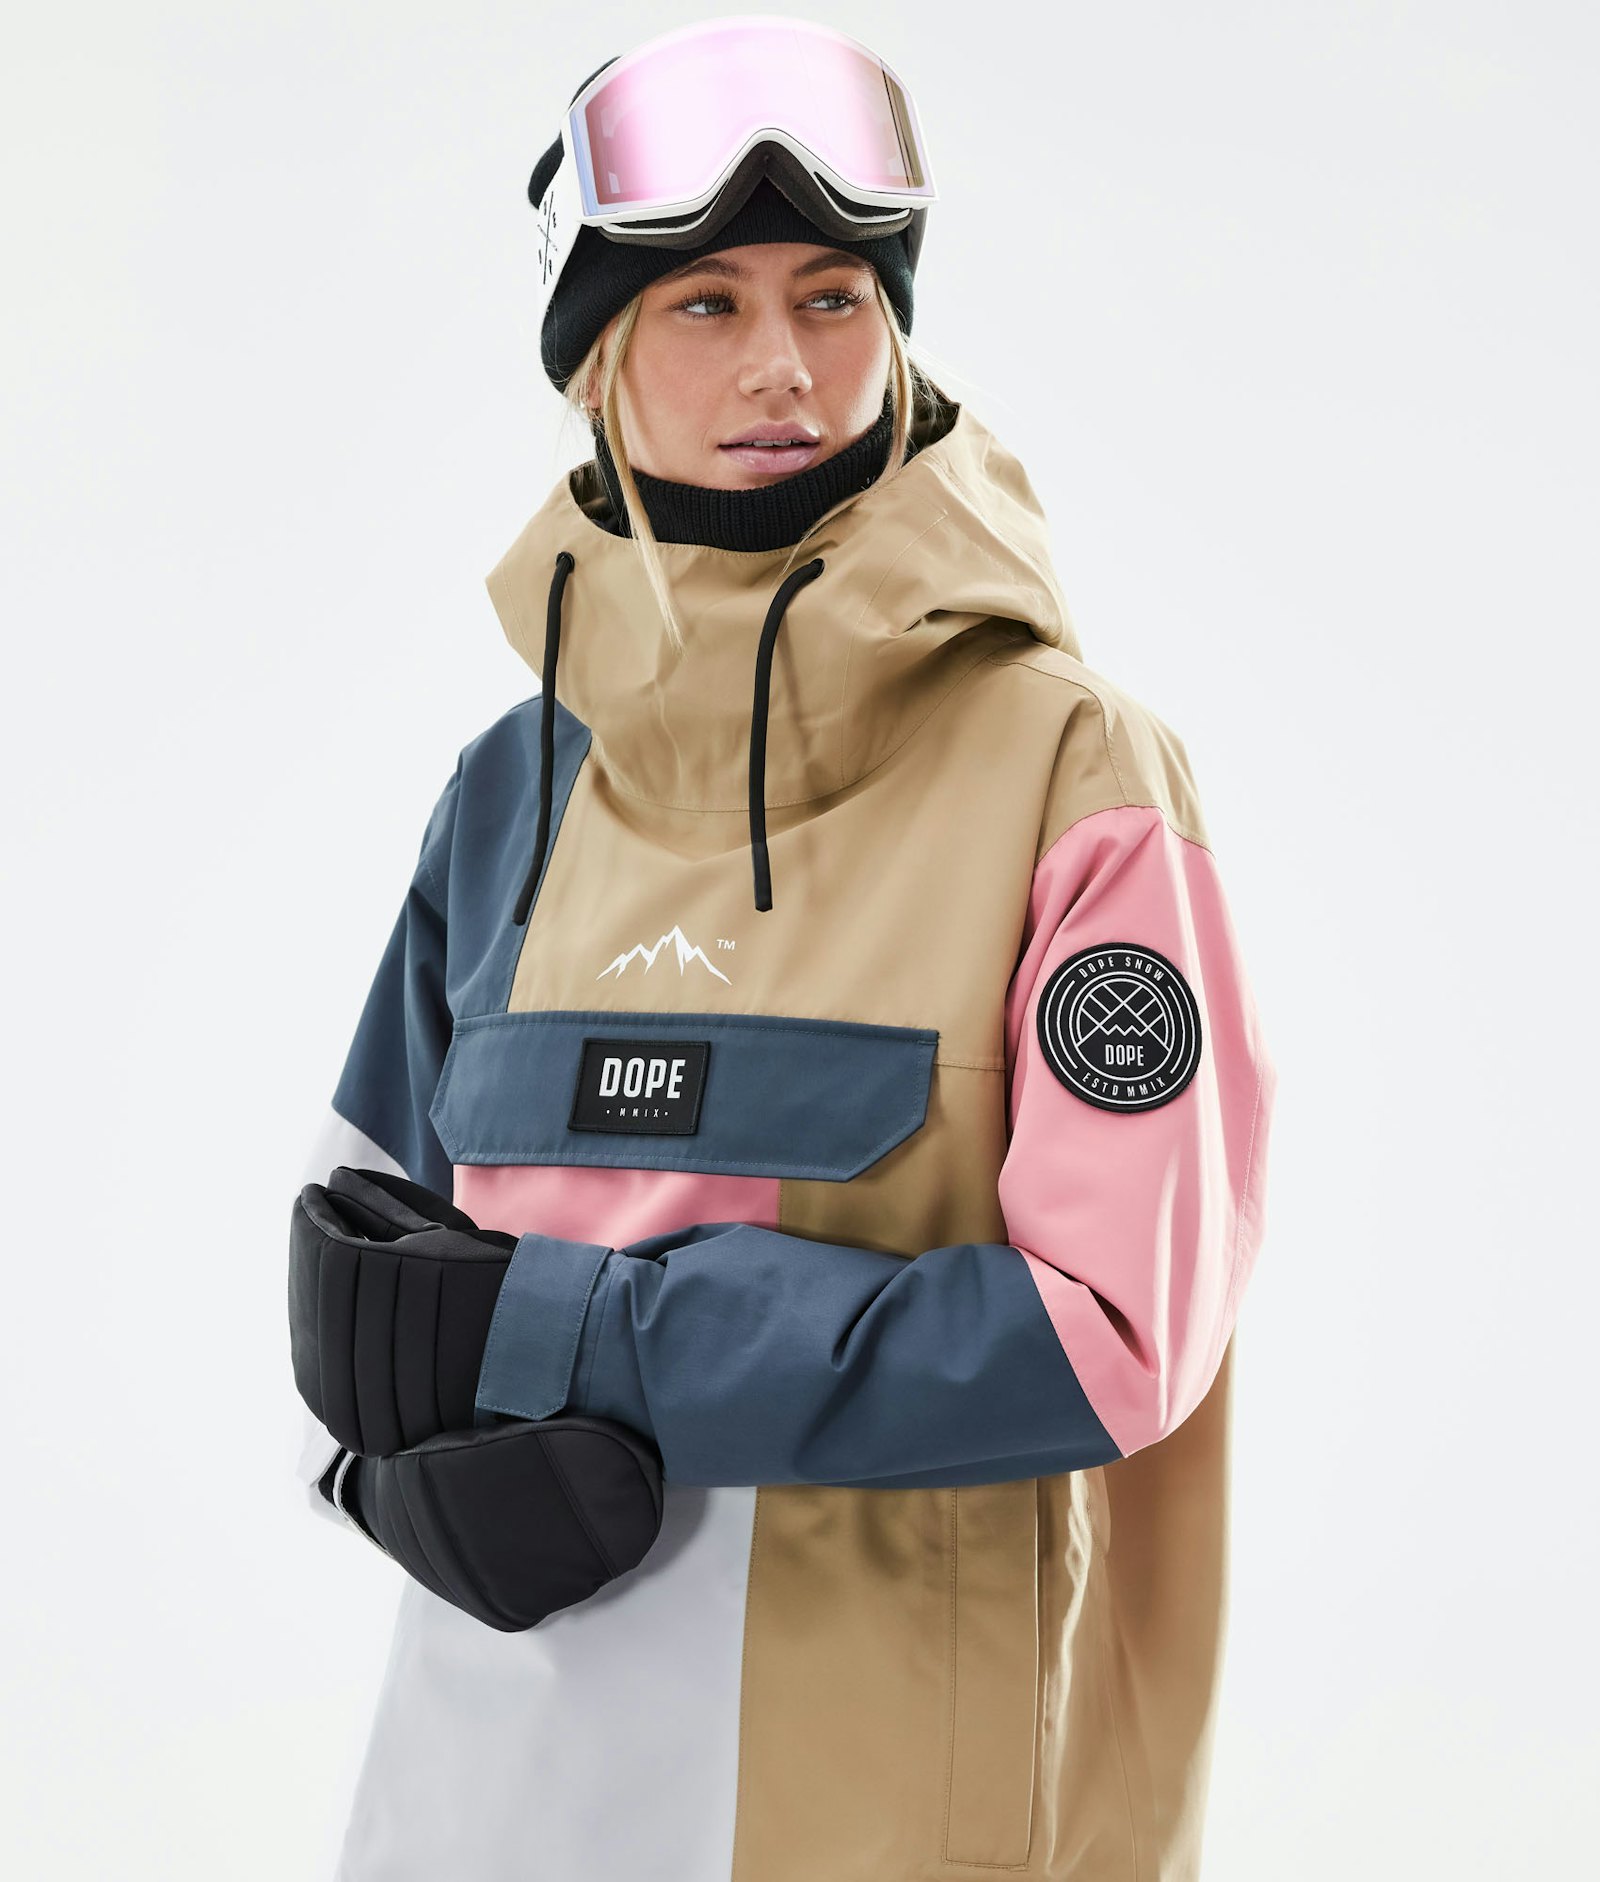 Dope Blizzard LE W Chaqueta Snowboard Mujer Limited Edition Patchwork Khaki